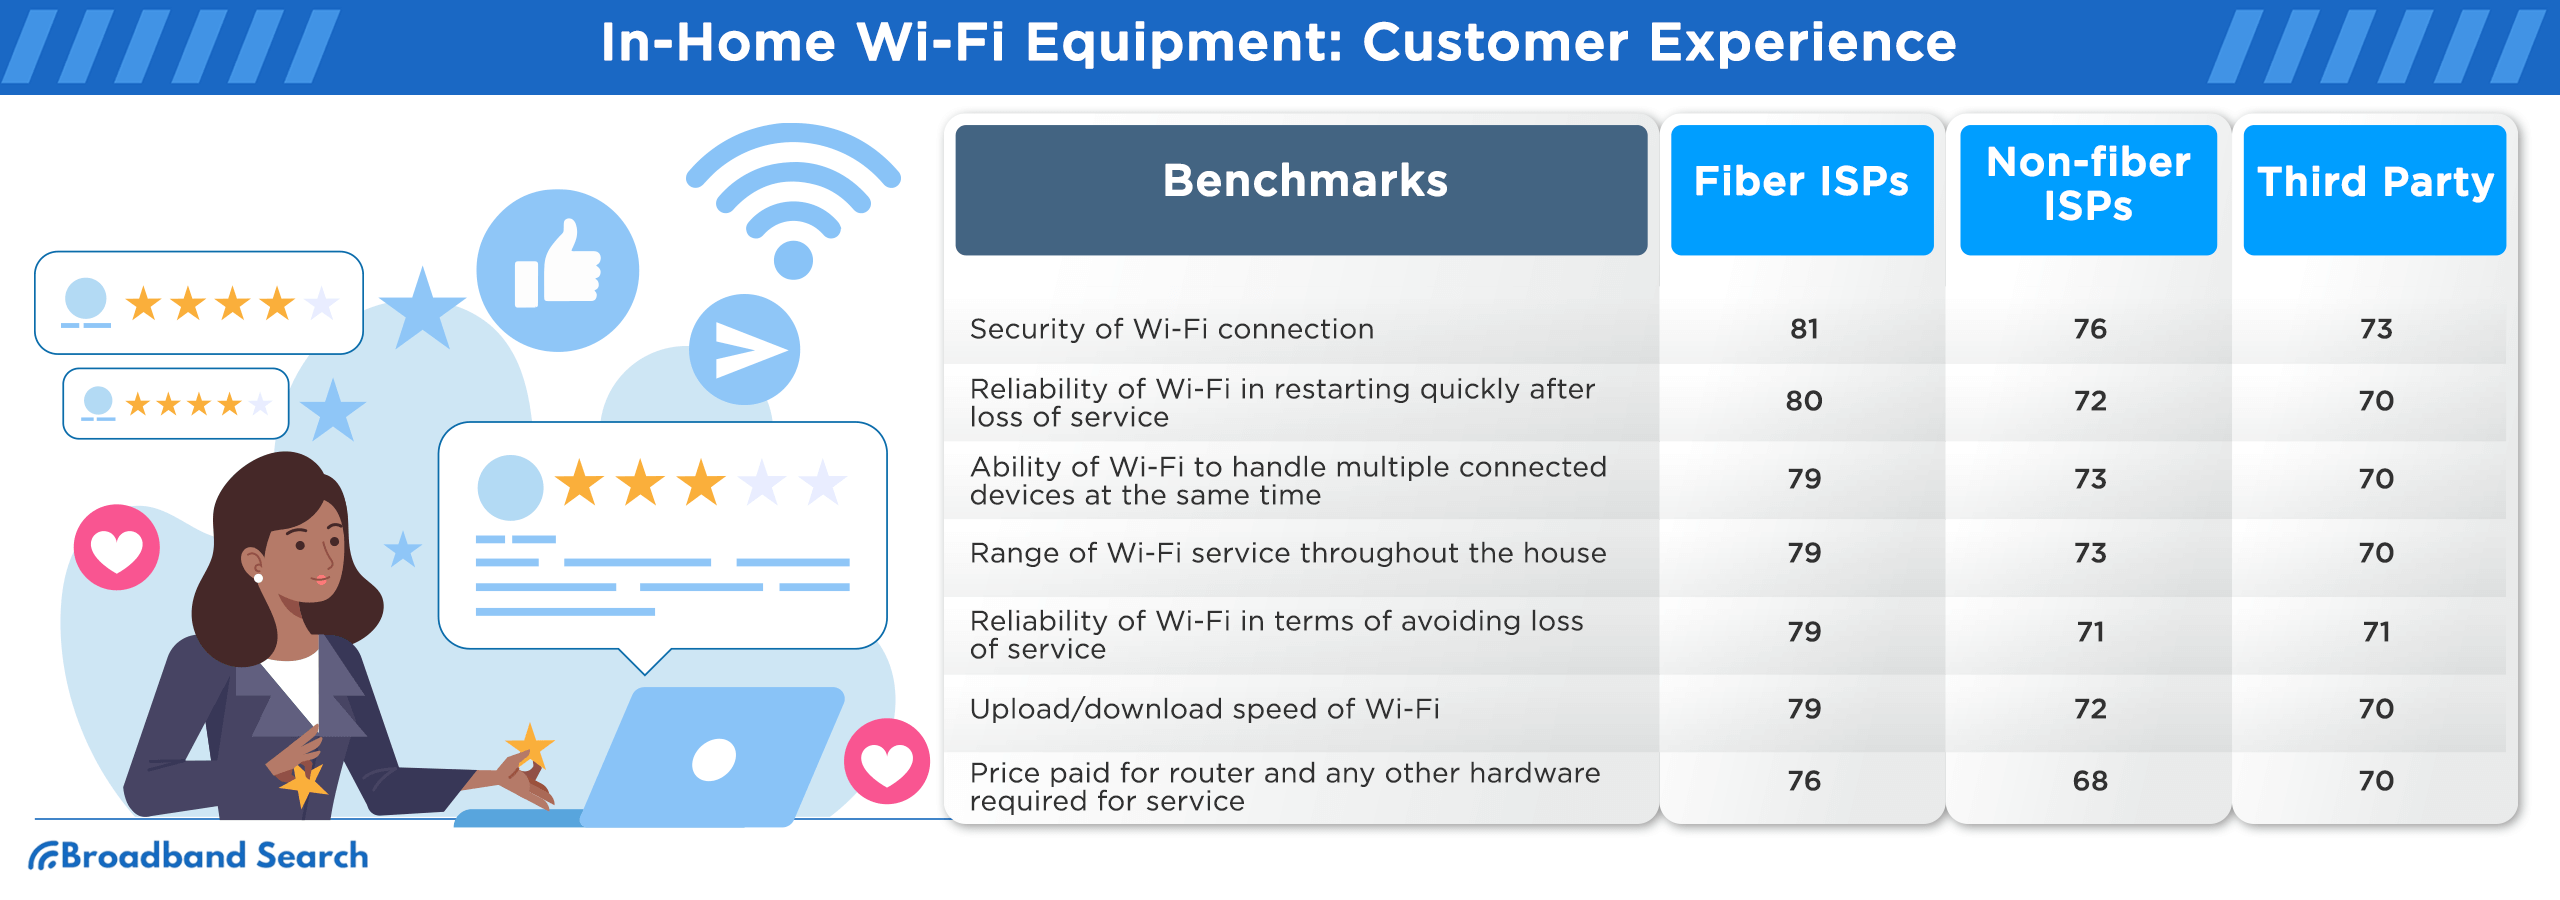 Comparison of Customer experience between fiber isps, non-fiber isps, and third parties